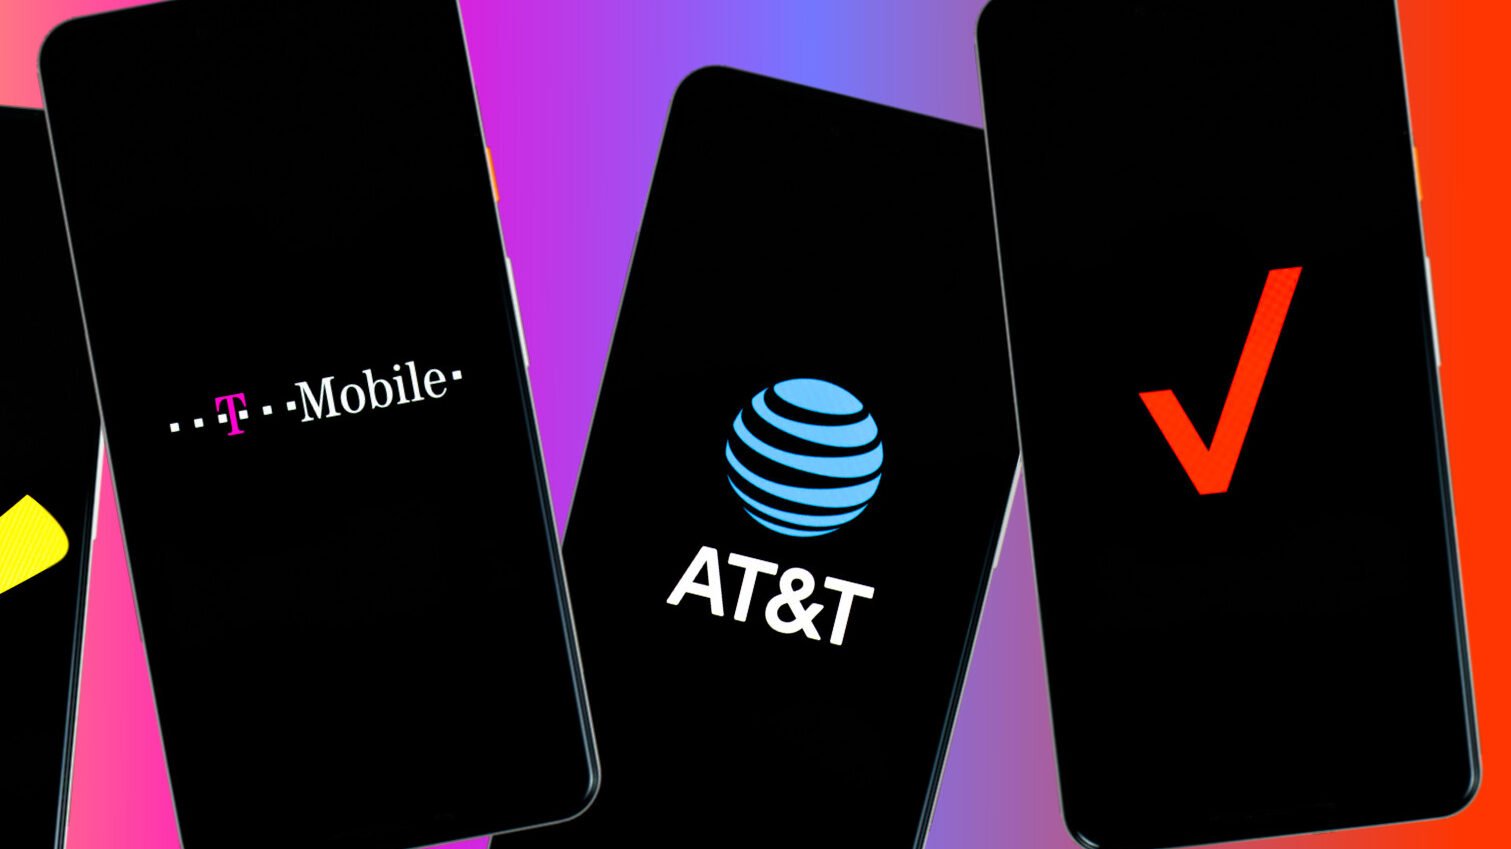 Every major US wireless carrier facing apparent outages right now